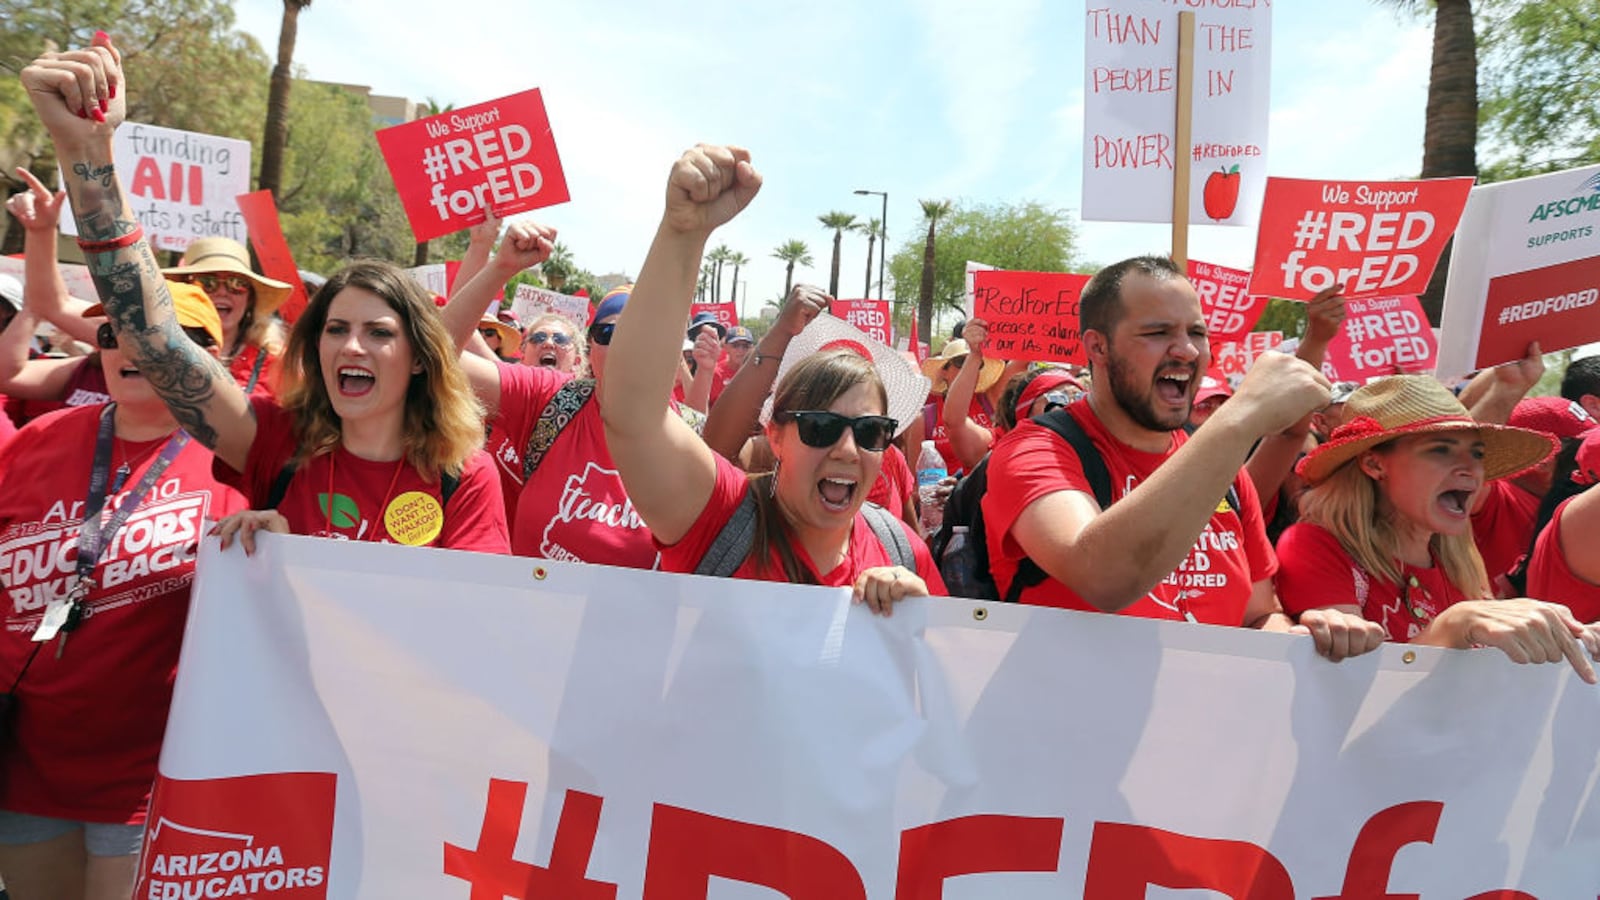 Arizona teachers chant in support of the #REDforED movement as they walk through downtown Phoenix  to the State Capitol on April 26, 2018. The walkout sought better wages and state funding for public schools. Its leaders are talking with teachers in Tennessee about how they can organize in a similar fashion. (Photo by Ralph Freso/Getty Images)